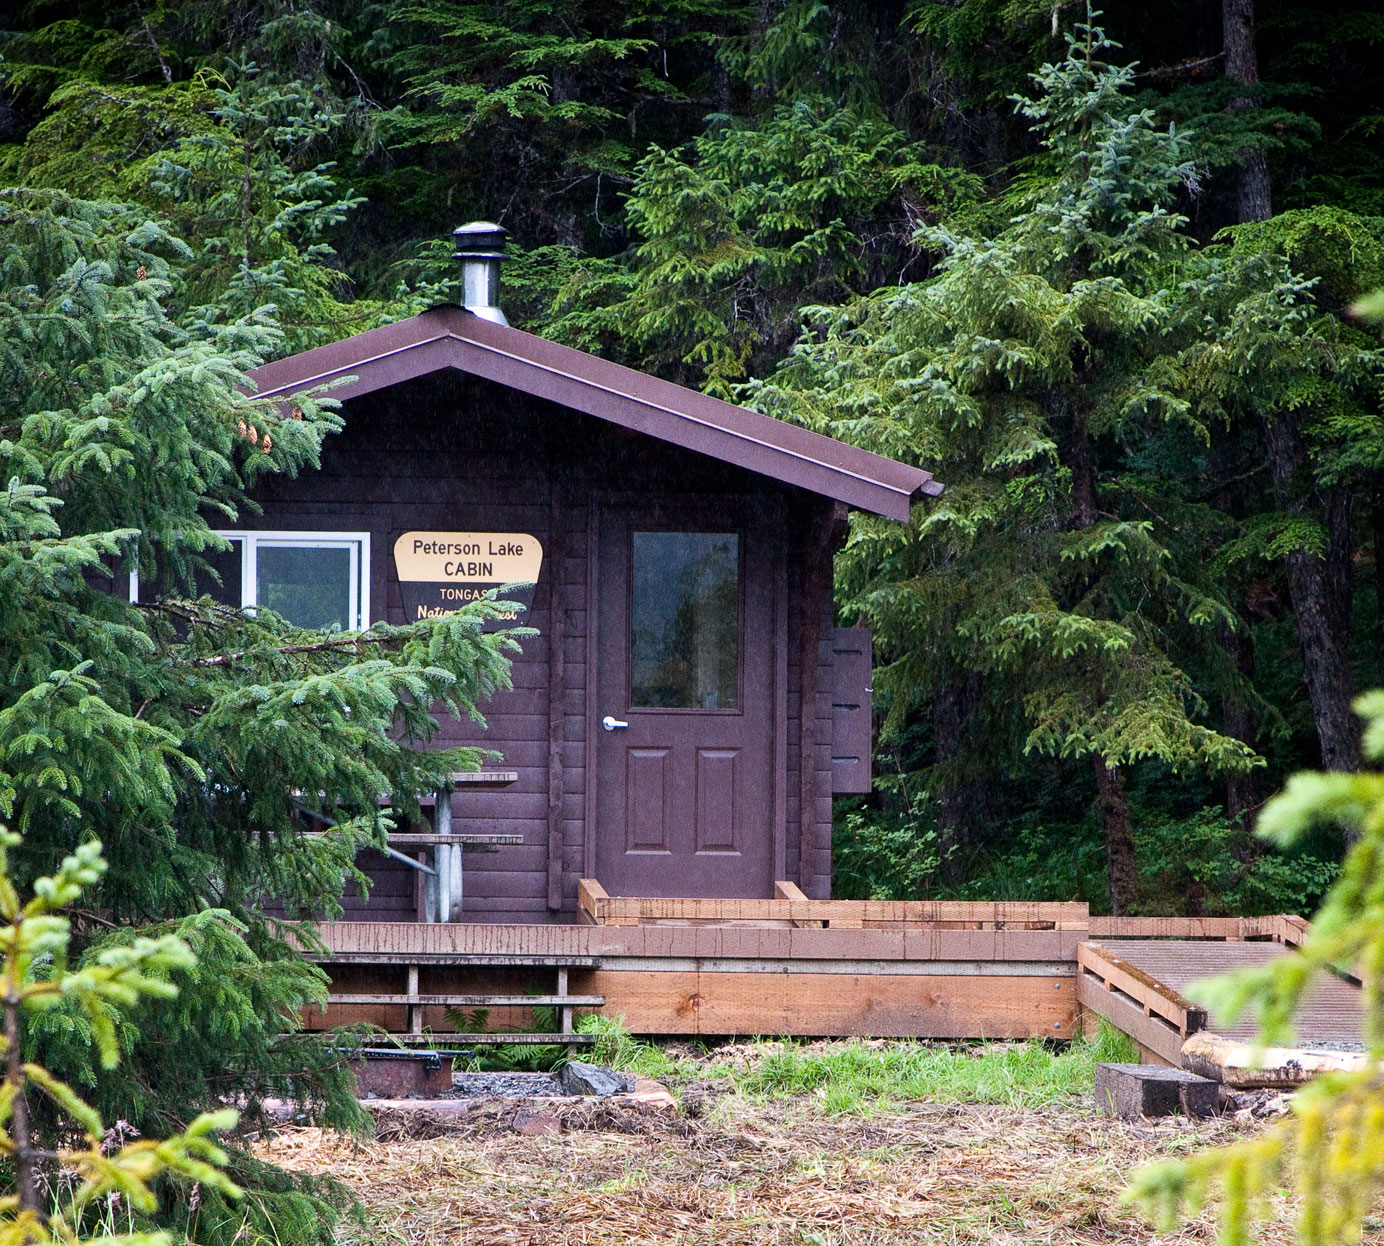 Fees to use the U.S. Forest Service's Peterson Lake Cabin may be going up. The USFS has proposed an increase from $35 per night to $75 per night.